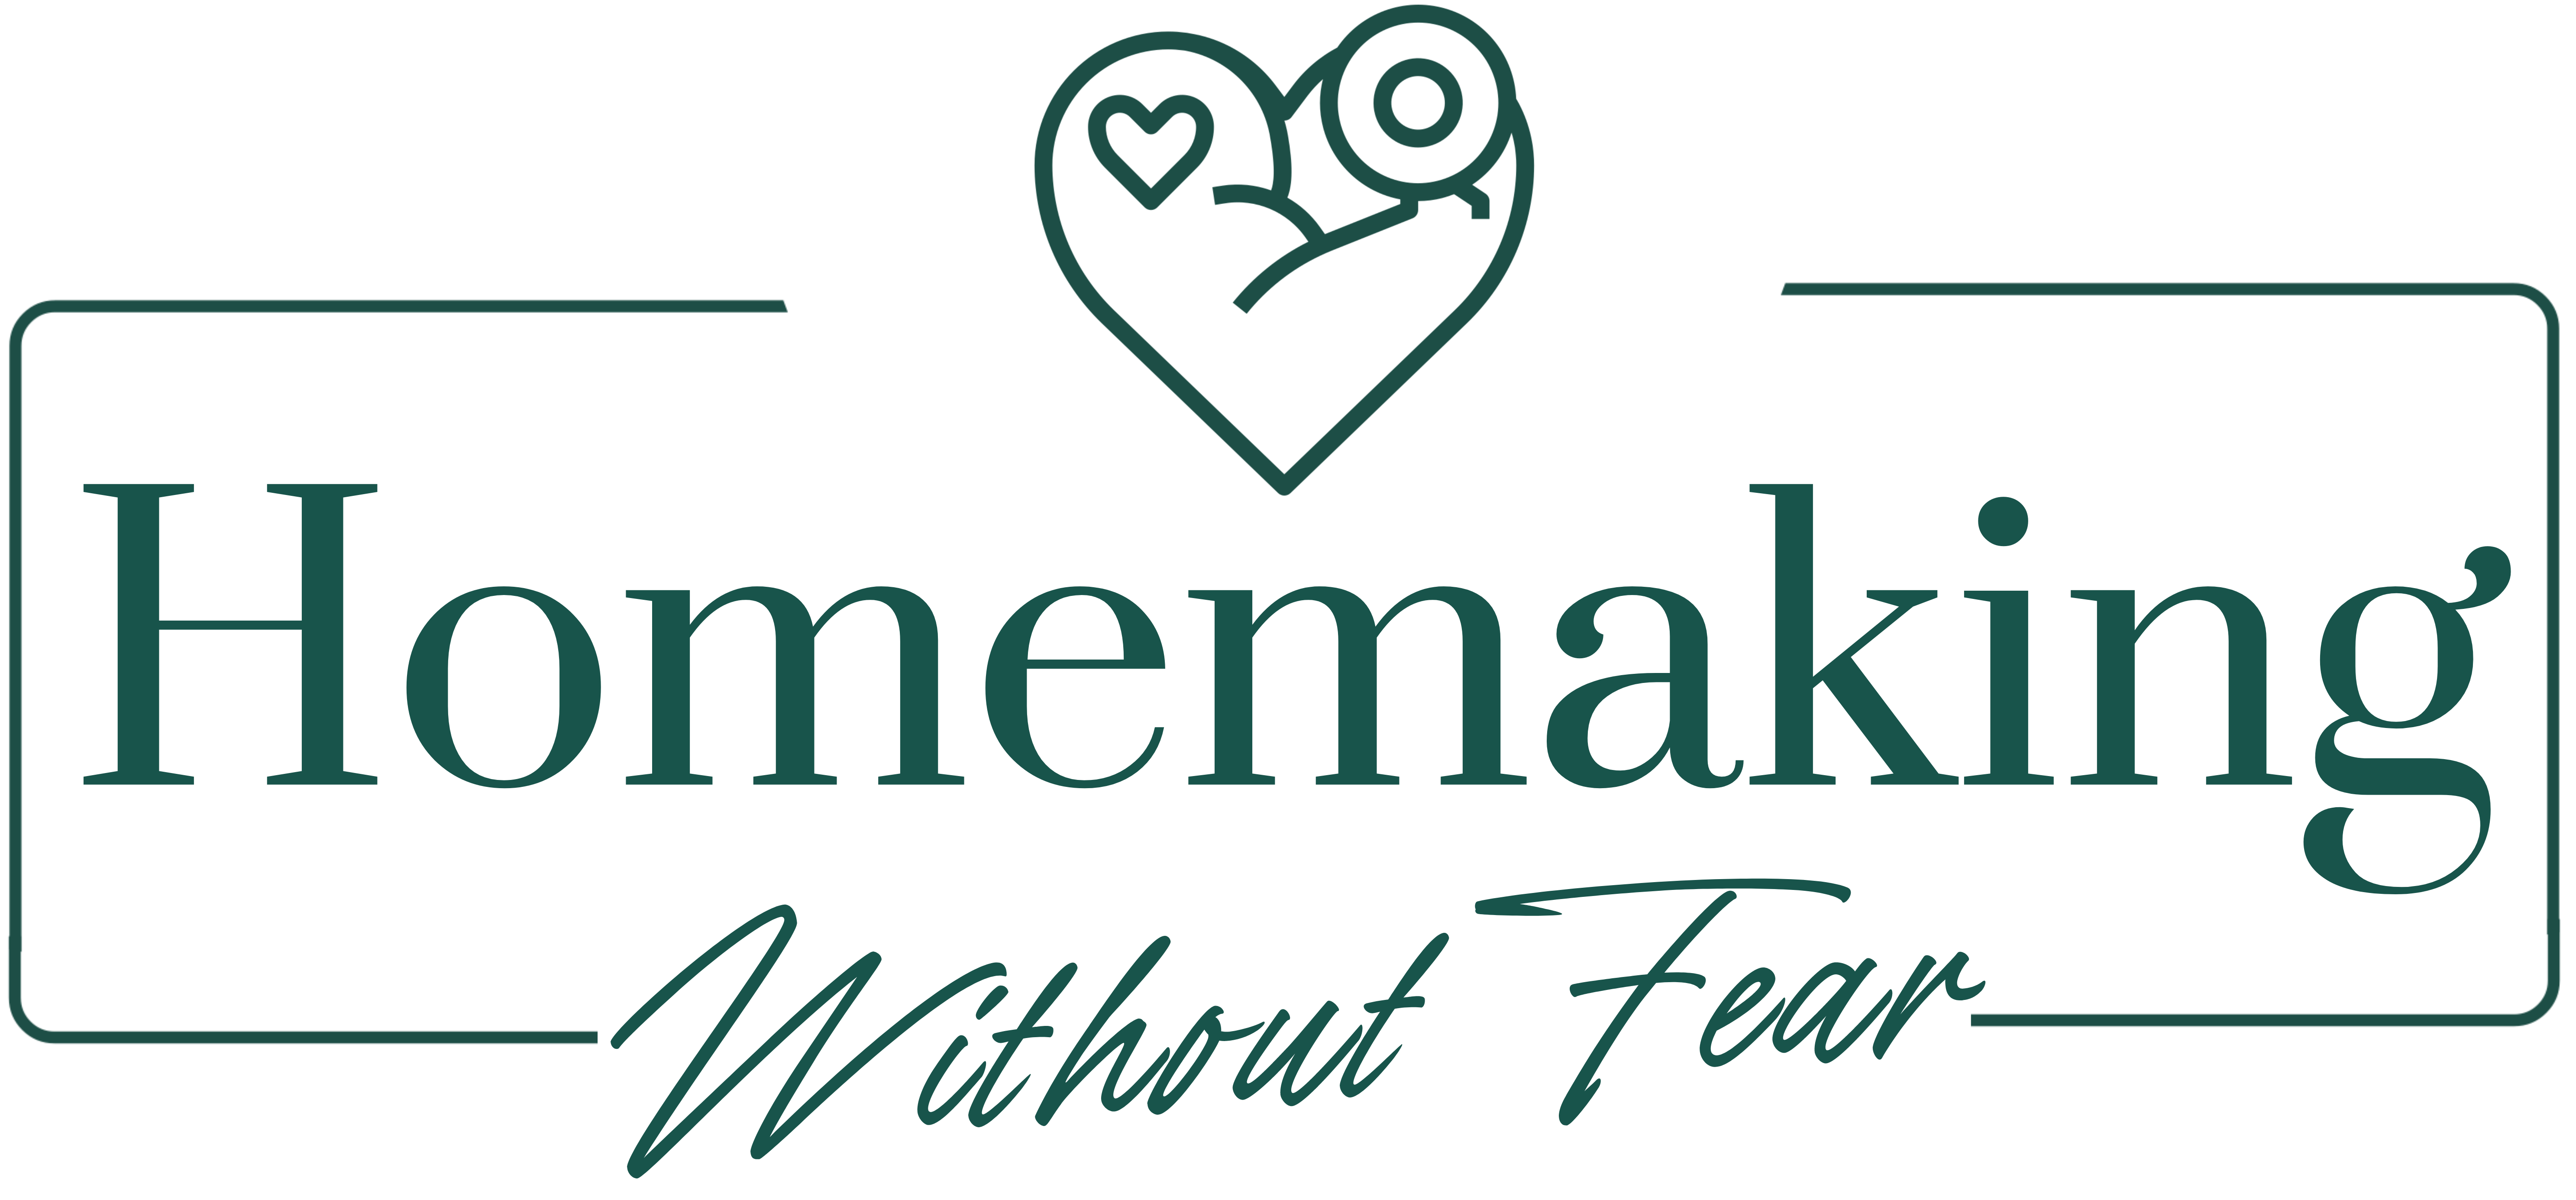 Homemaking without Fear Logo with white background